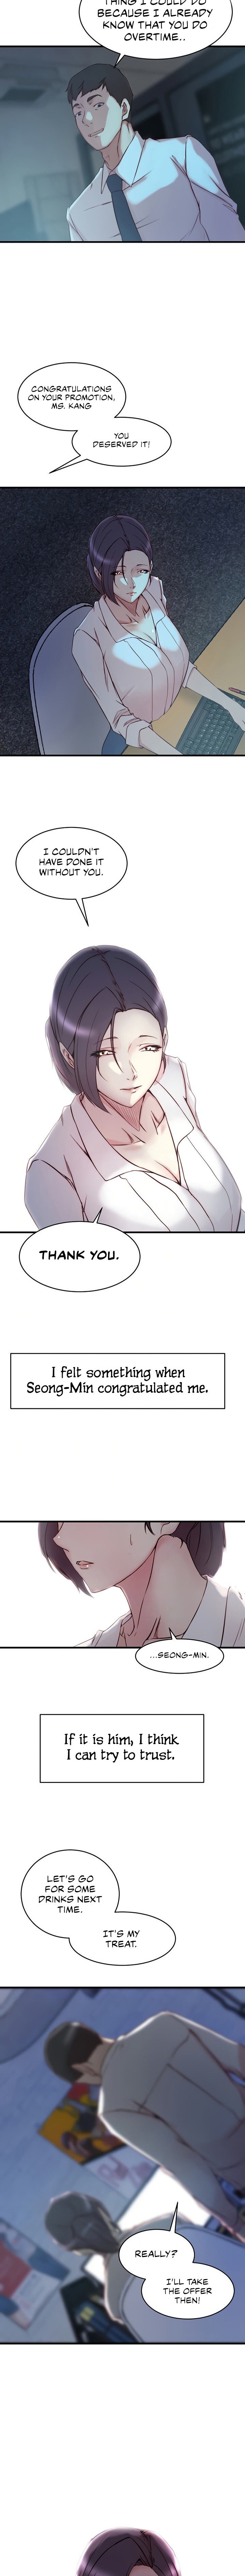 Sister-in-Law Manhwa - Chapter 39 Page 4